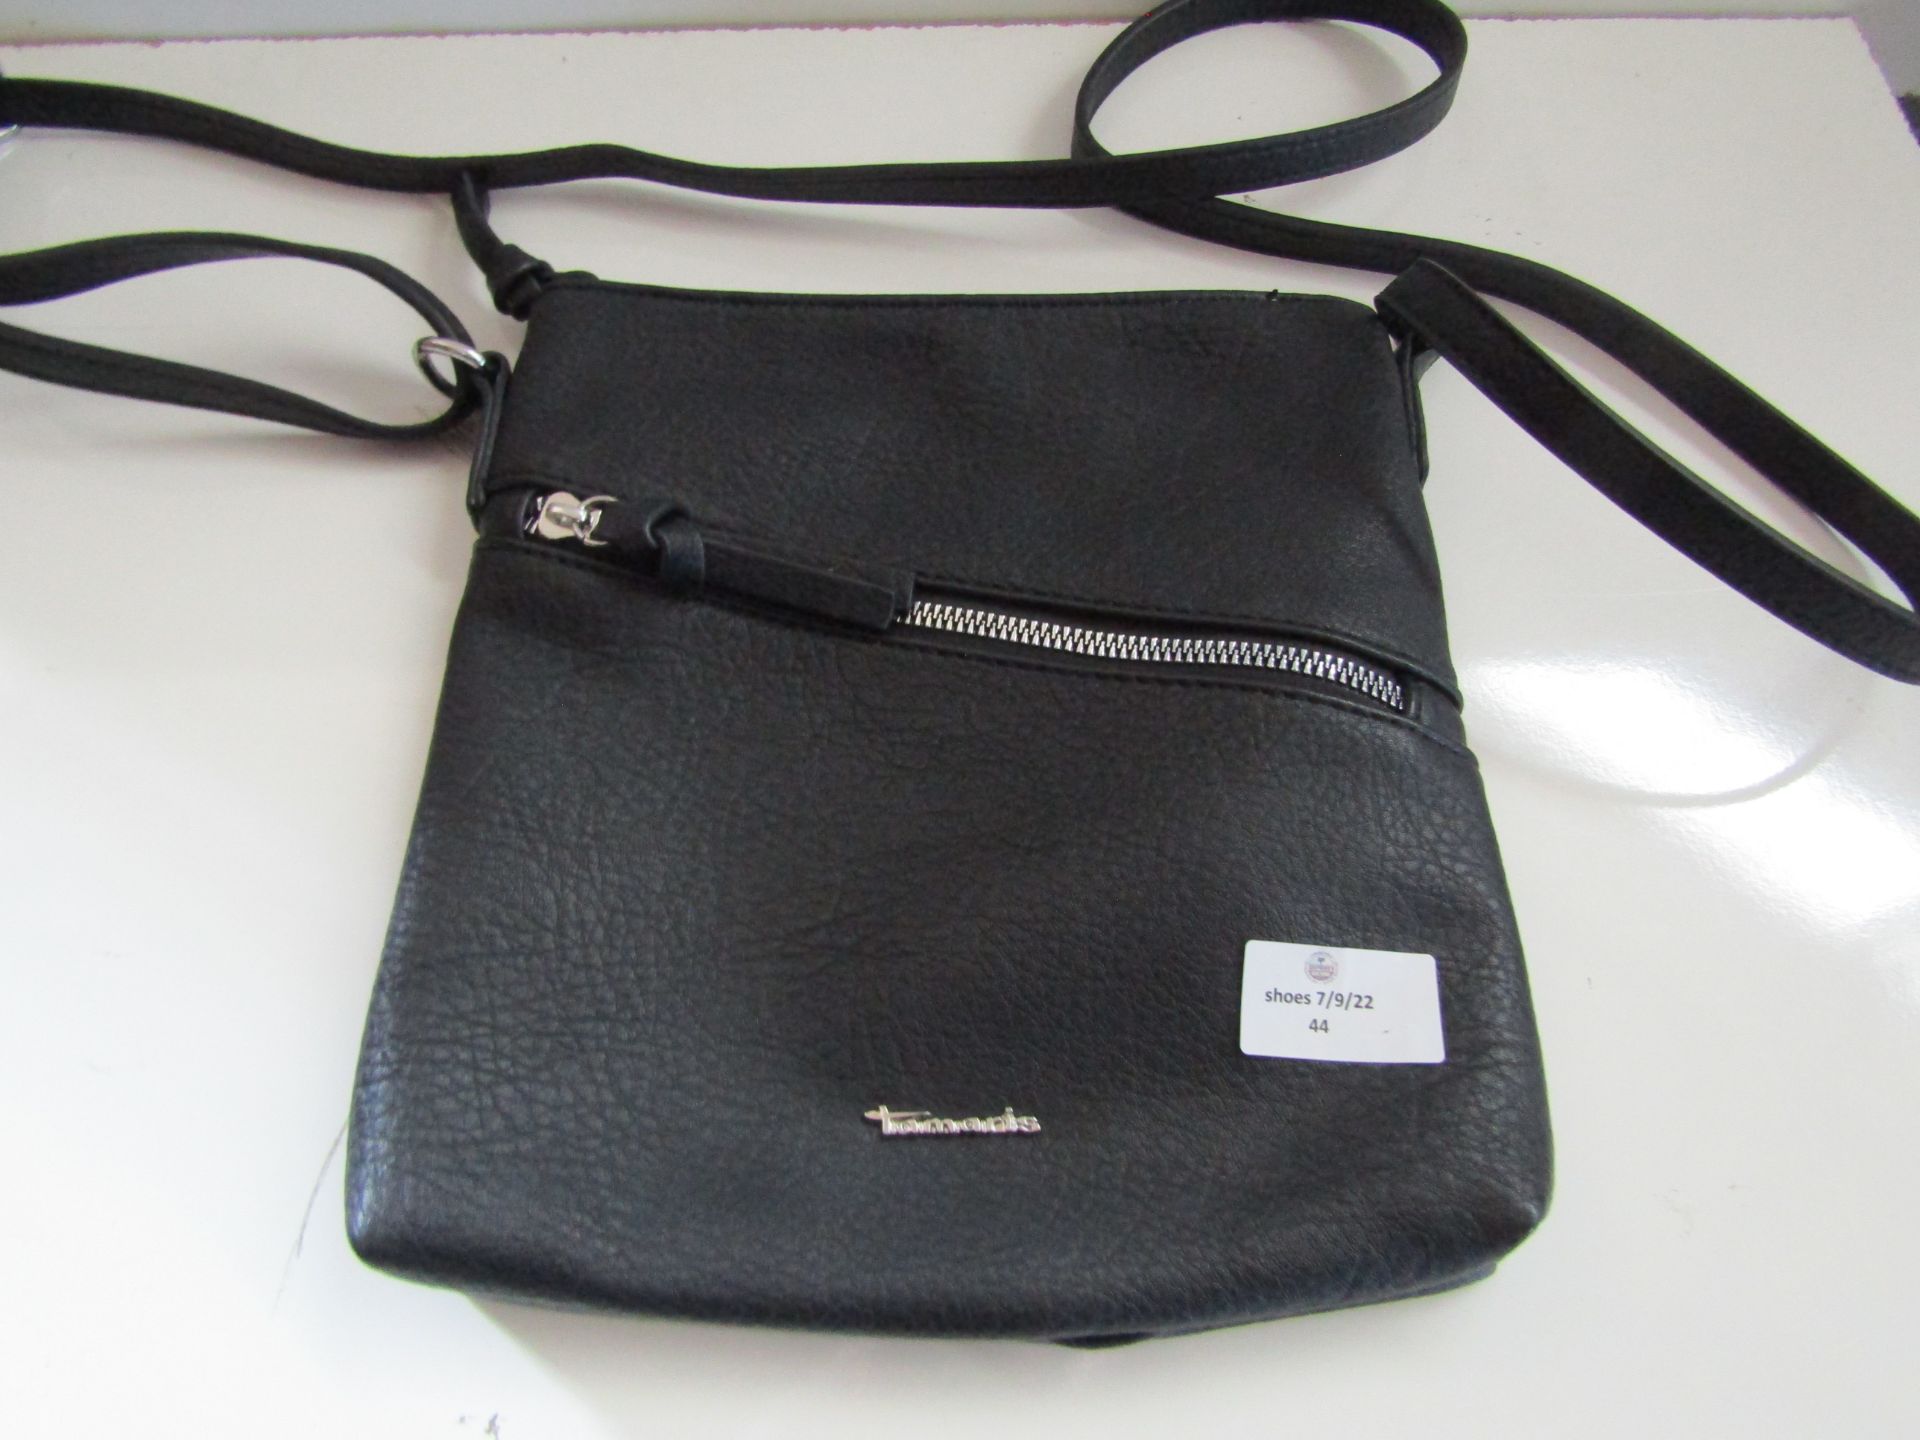 Tomaris Cross Body Bag Black Requires a Small Repair to The Bottom of The Bag ( Looks Unused )